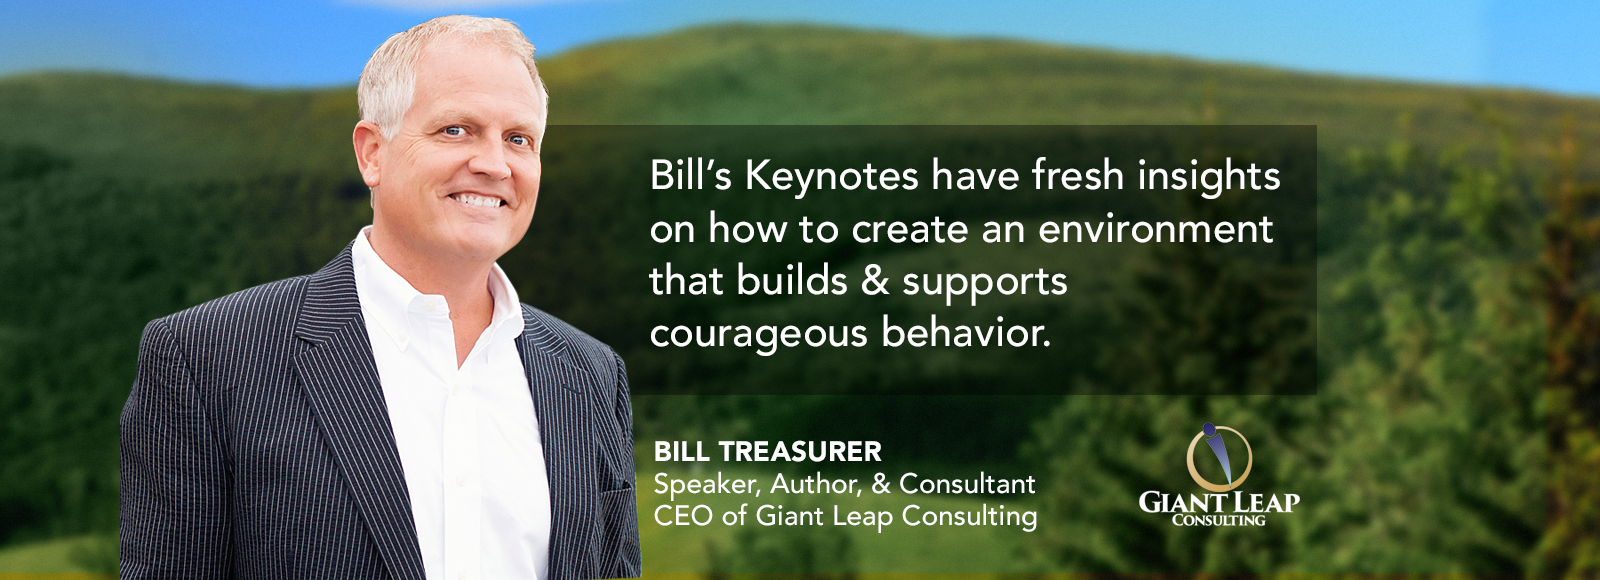 Speaker, Author & CEO Of Giant Leap Consulting